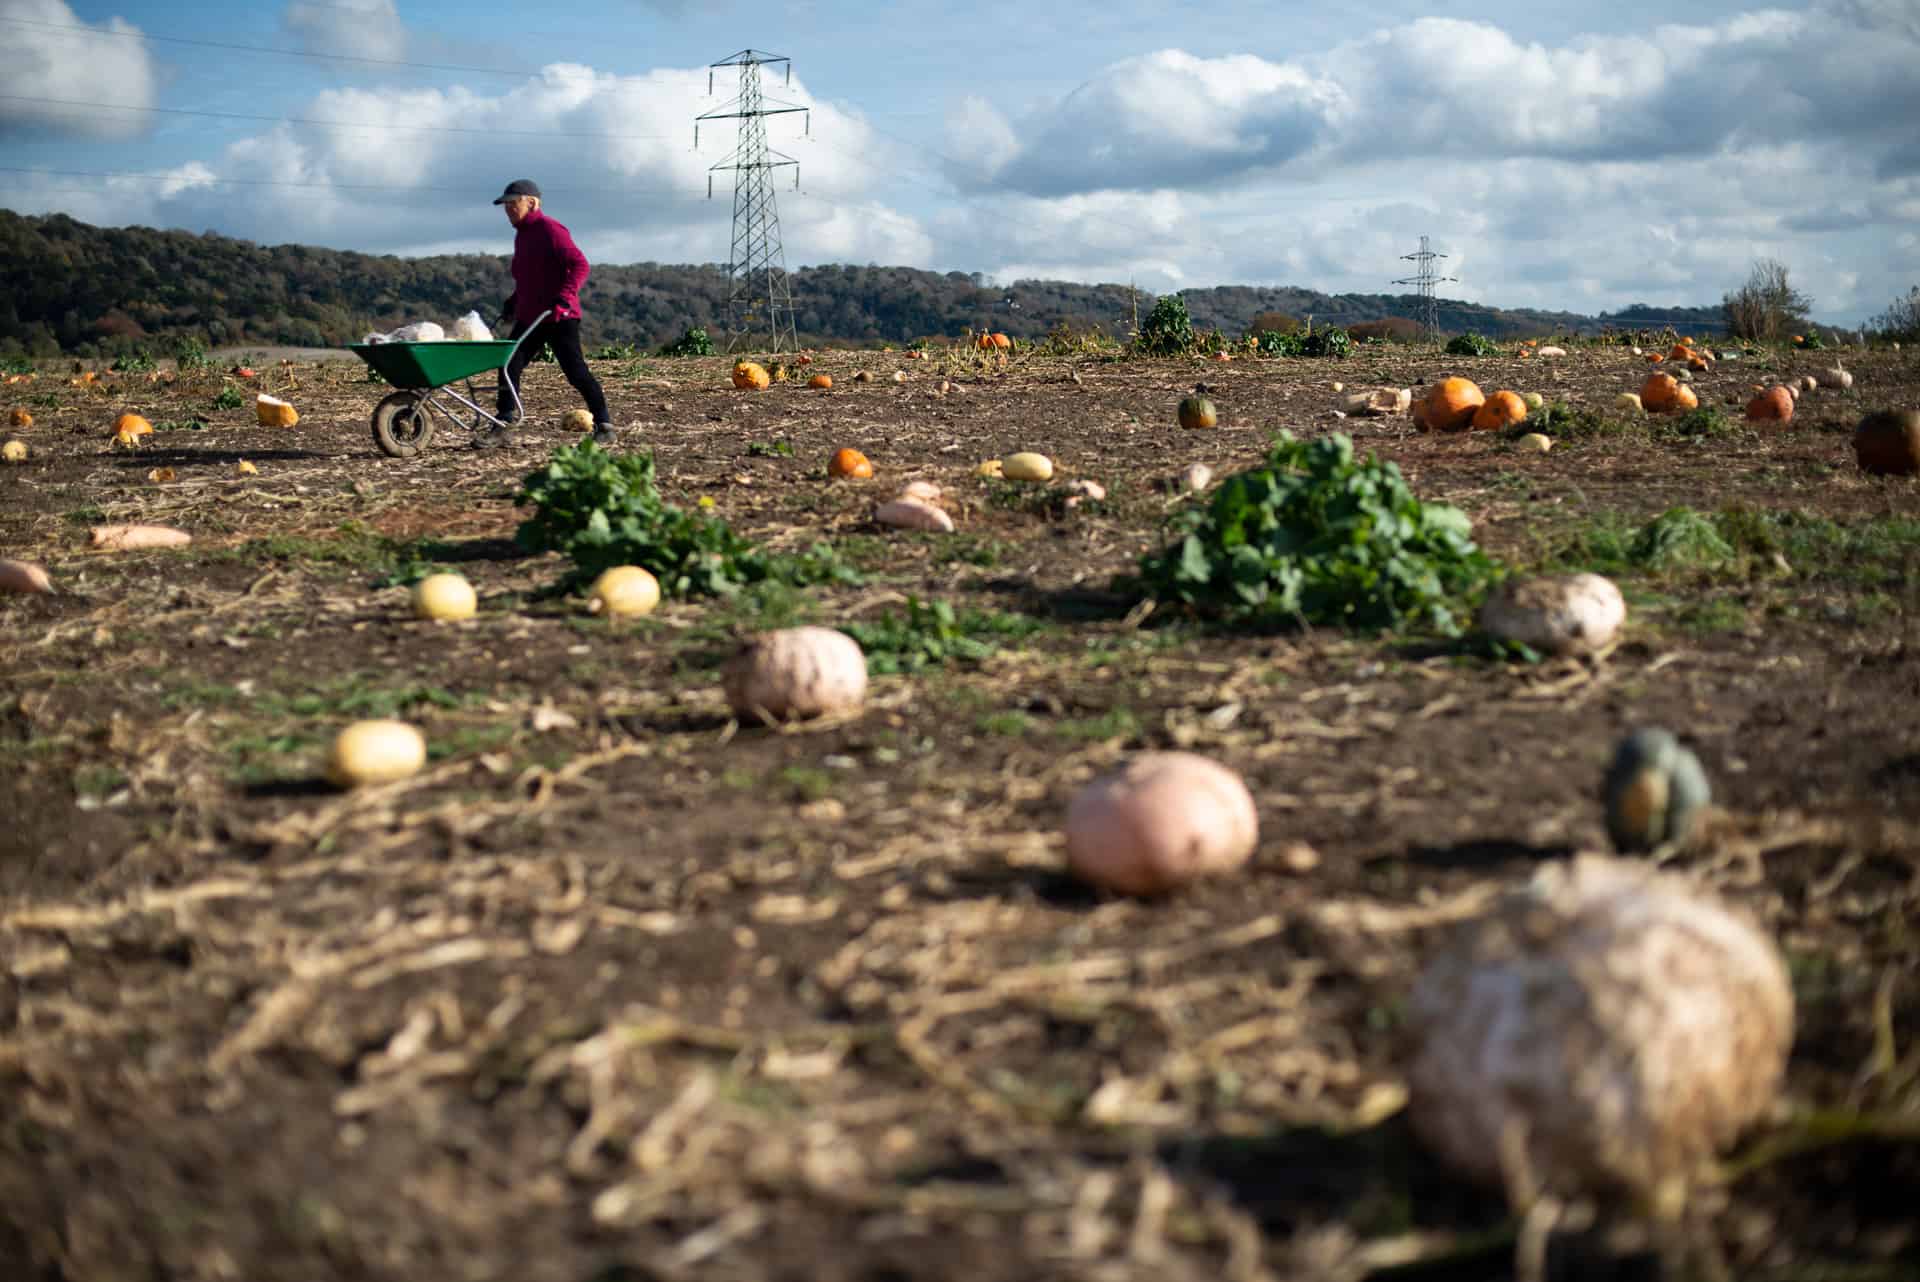 Gleaning pumkins and squashes - Documentary Photography by Chris King for Open Eye Media